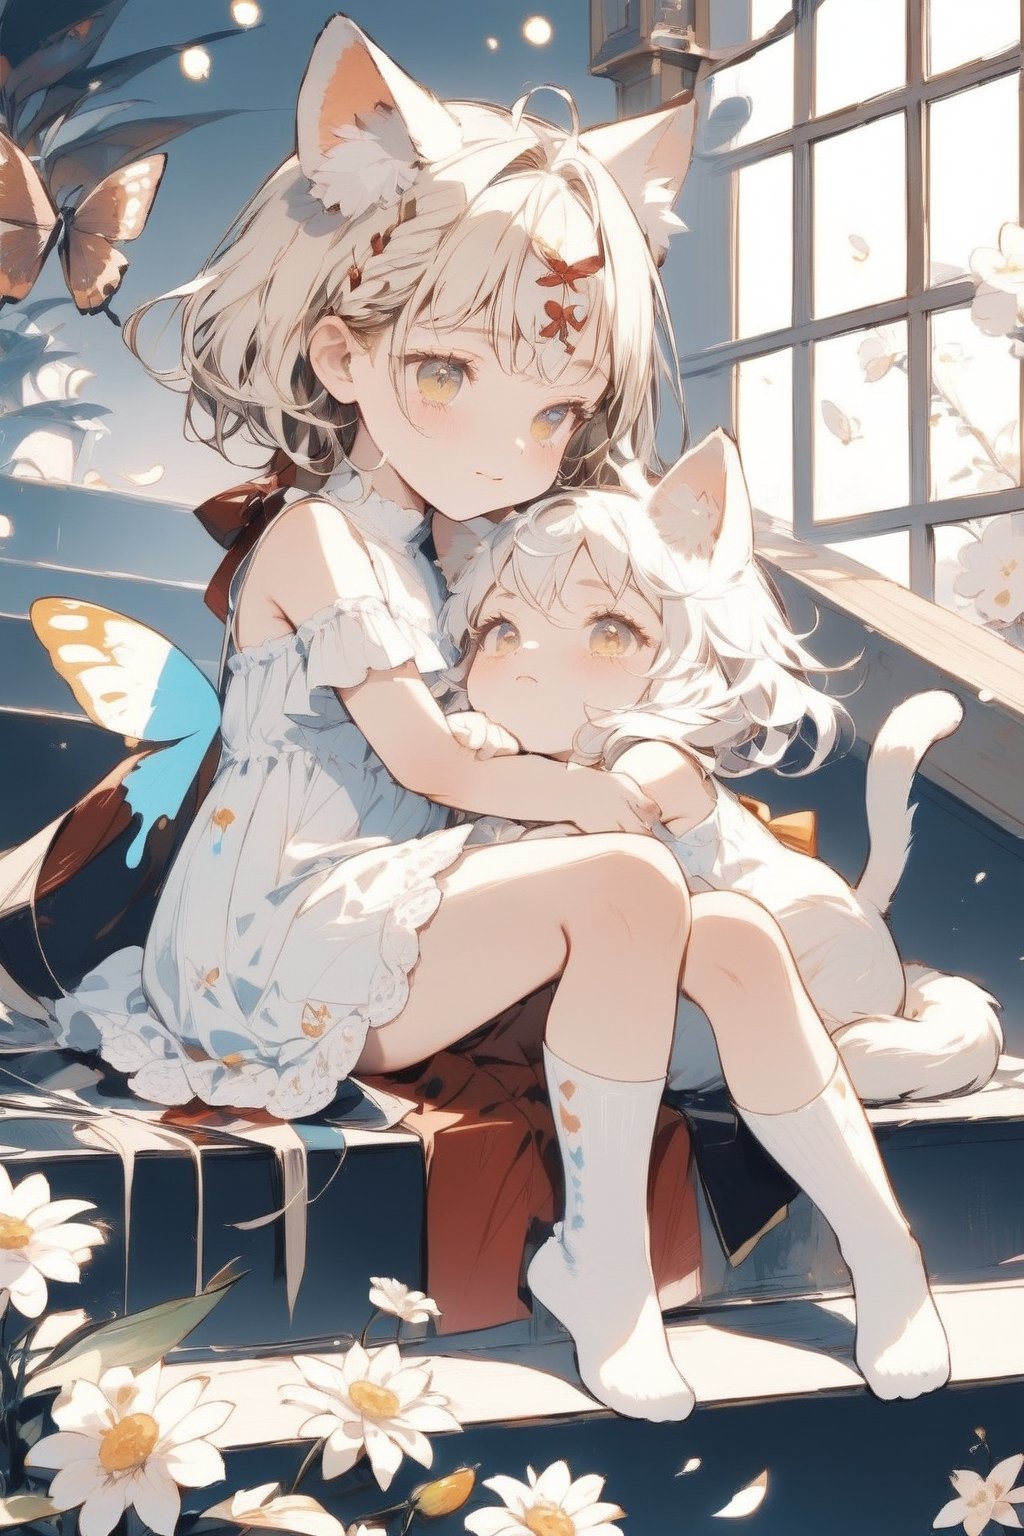 A whimsical masterpiece! A pair of chibi girls, one blonde and the other white-haired, sit on a staircase surrounded by flowers. They're dressed in matching white dresses with sleeveless tops, showcasing their knee-high socks. The blonde girl sports a fringe and blue eyes, while her counterpart has yellow eyes. Their faces are serene, mouths closed in smiles. A cat and butterfly flutter nearby, as the girls hug each other, both adorned with hair ornaments. Insects and musical instruments create a subtle backdrop, blending harmoniously with the isometric design.